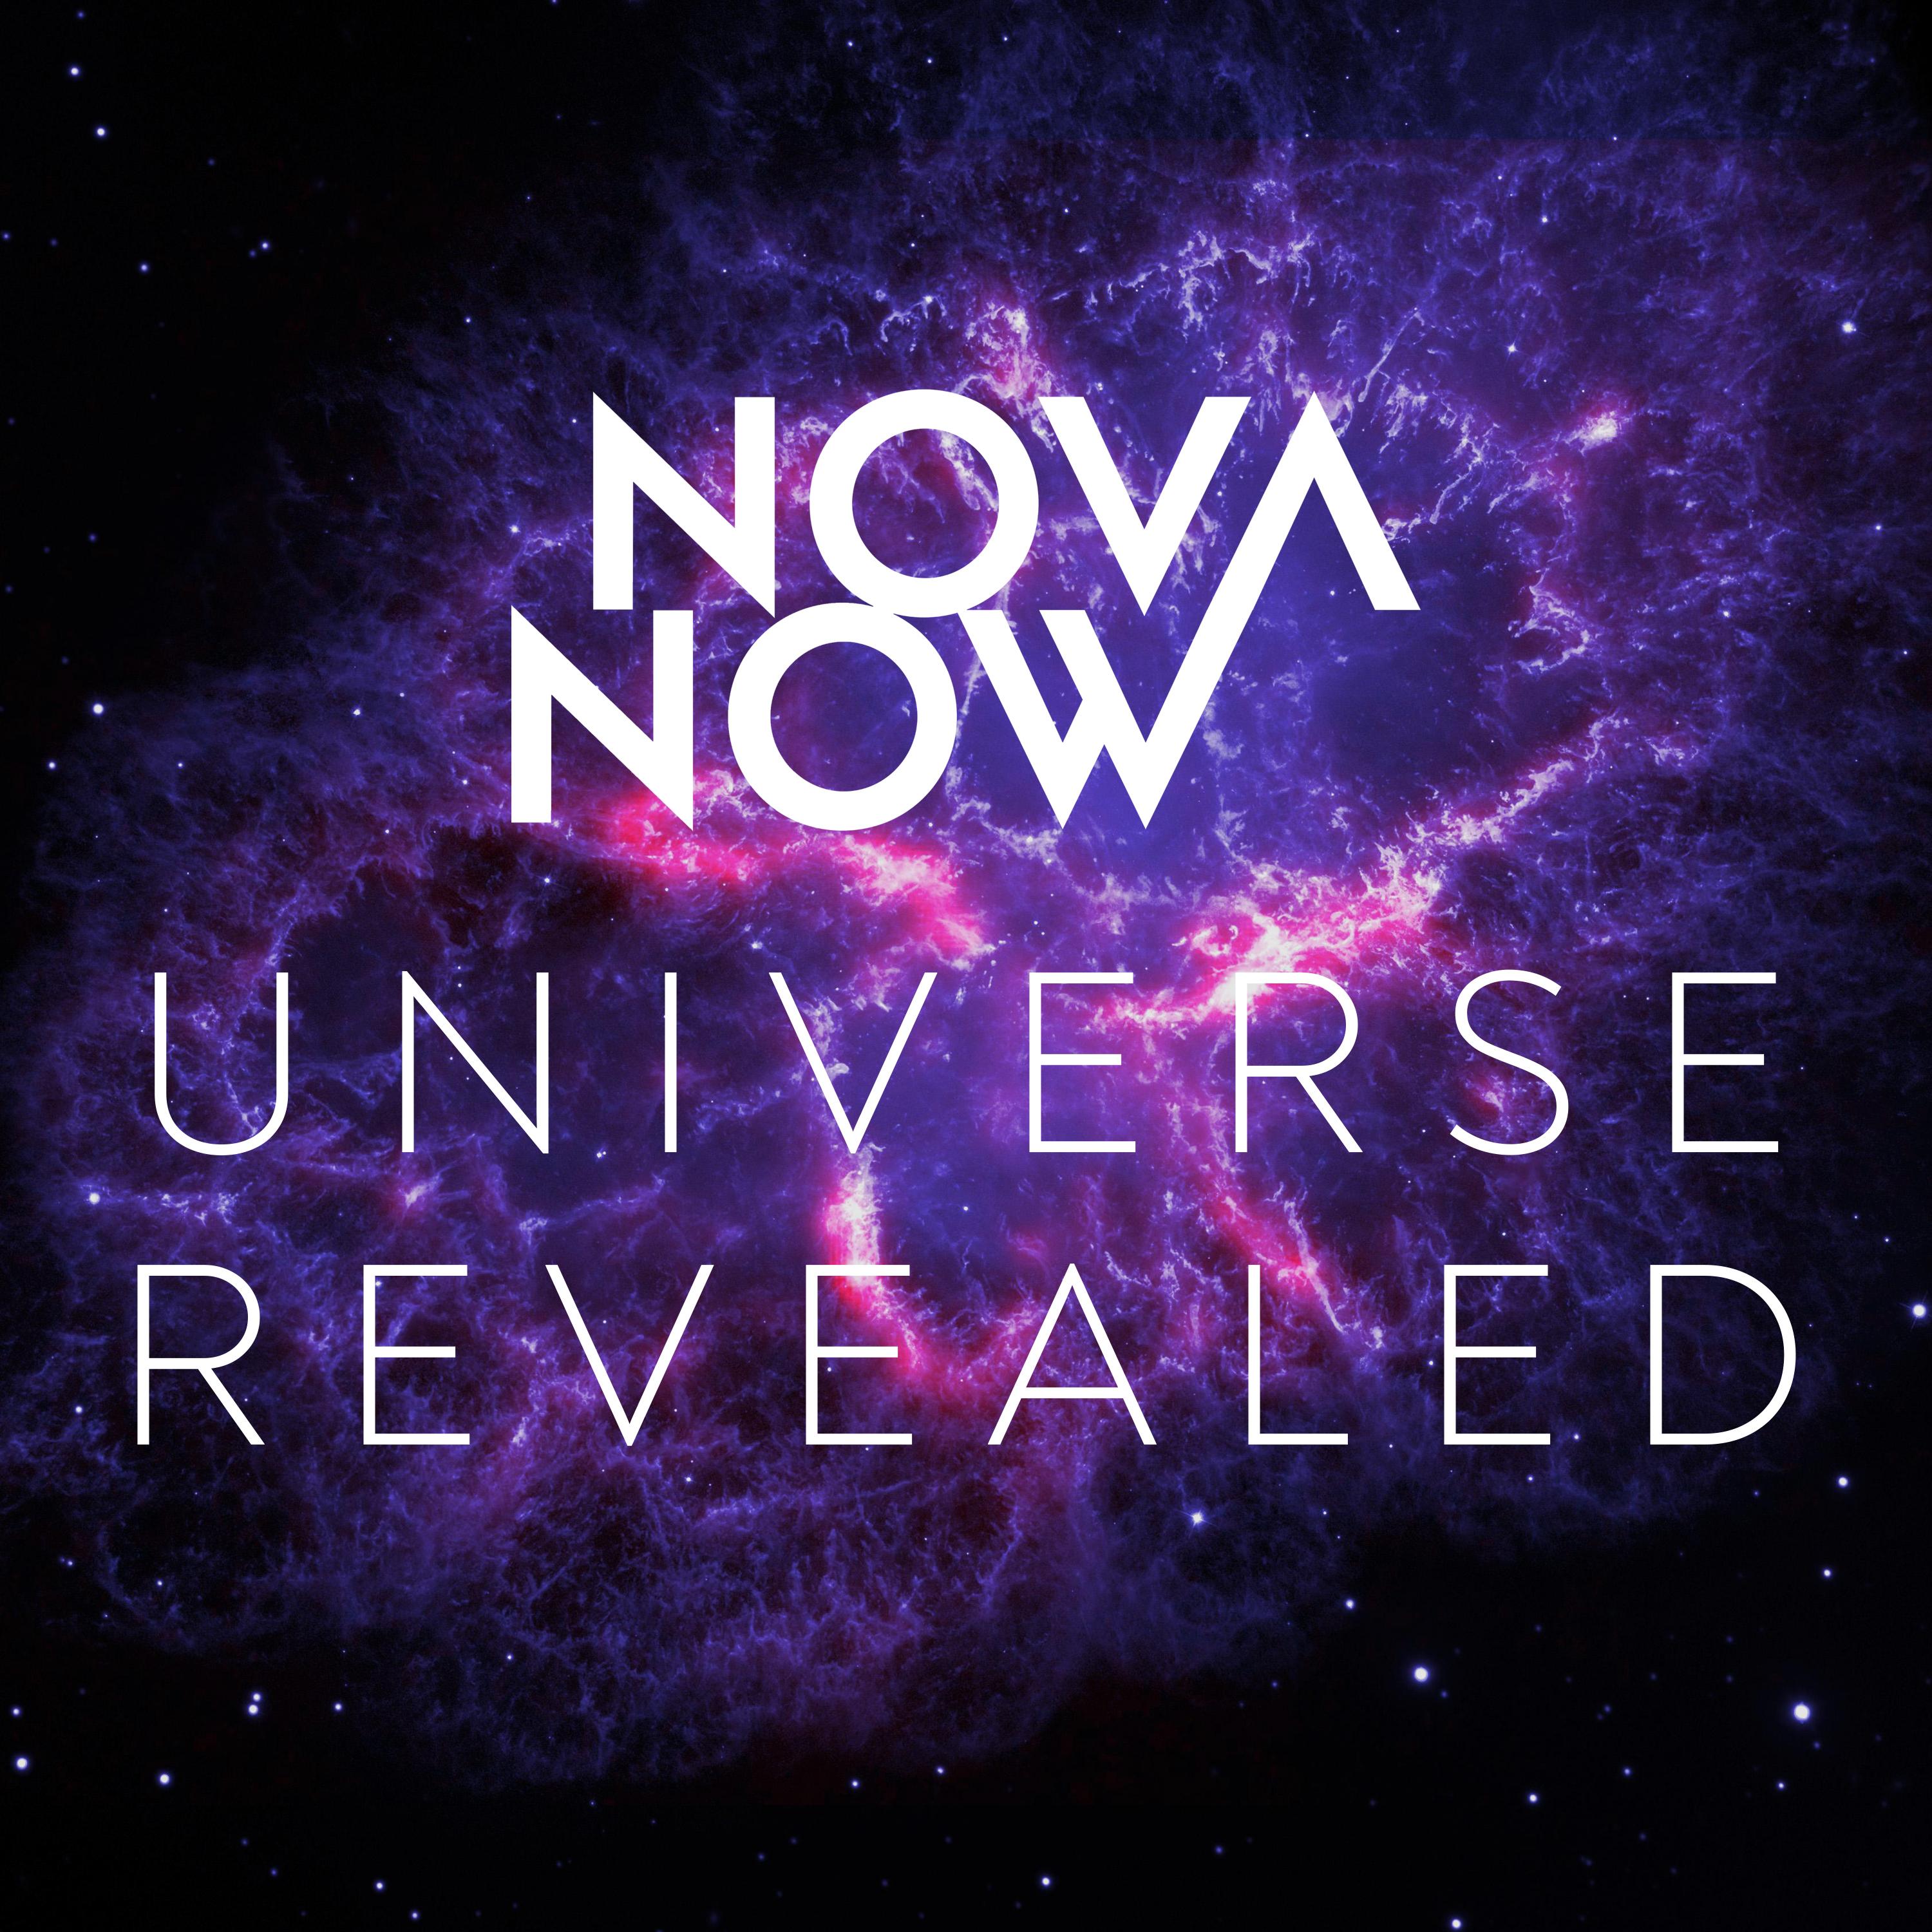 Thumbnail for "This is NOVA Now Universe Revealed".